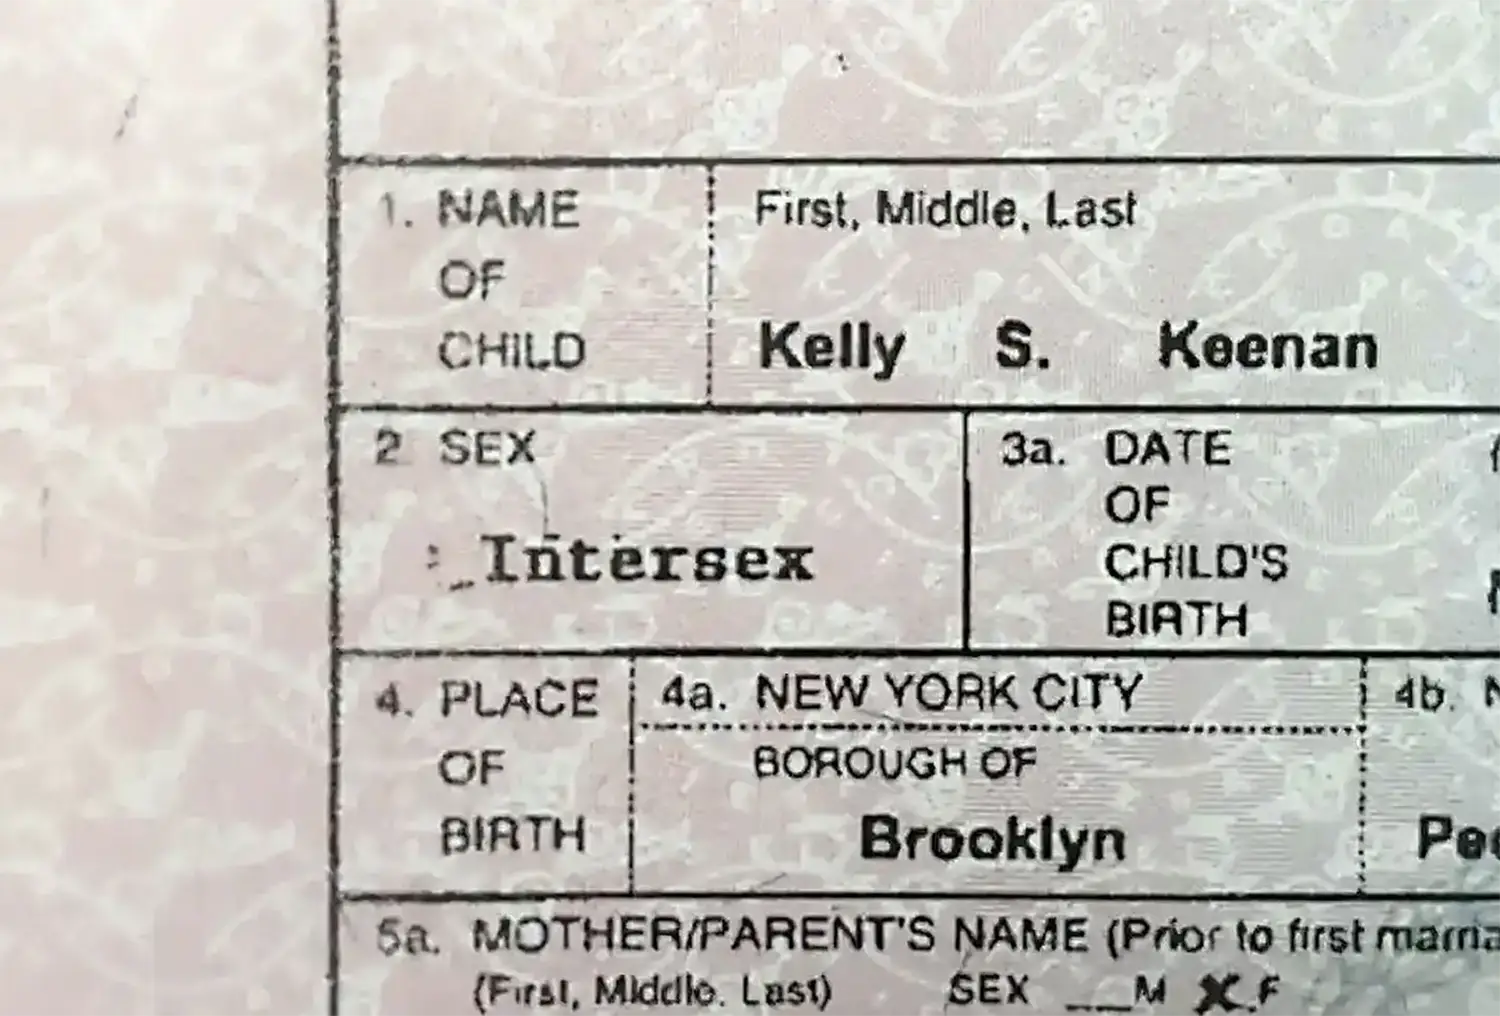 A tight-cropped photo of a birth certificate which has “Intersex” printed beneath the Sex box.